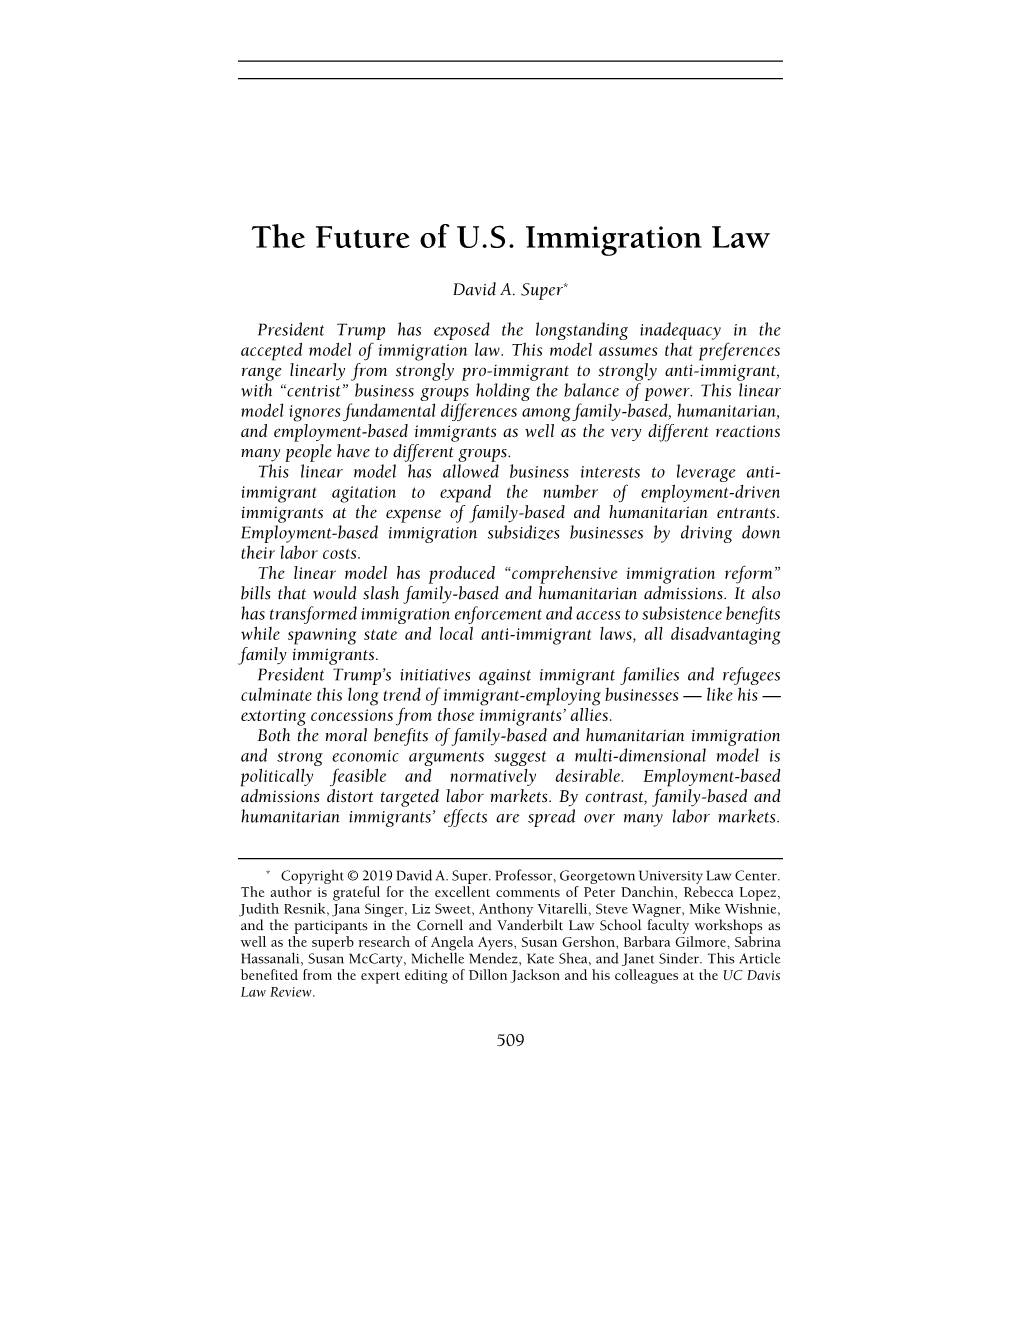 The Future of U.S. Immigration Law